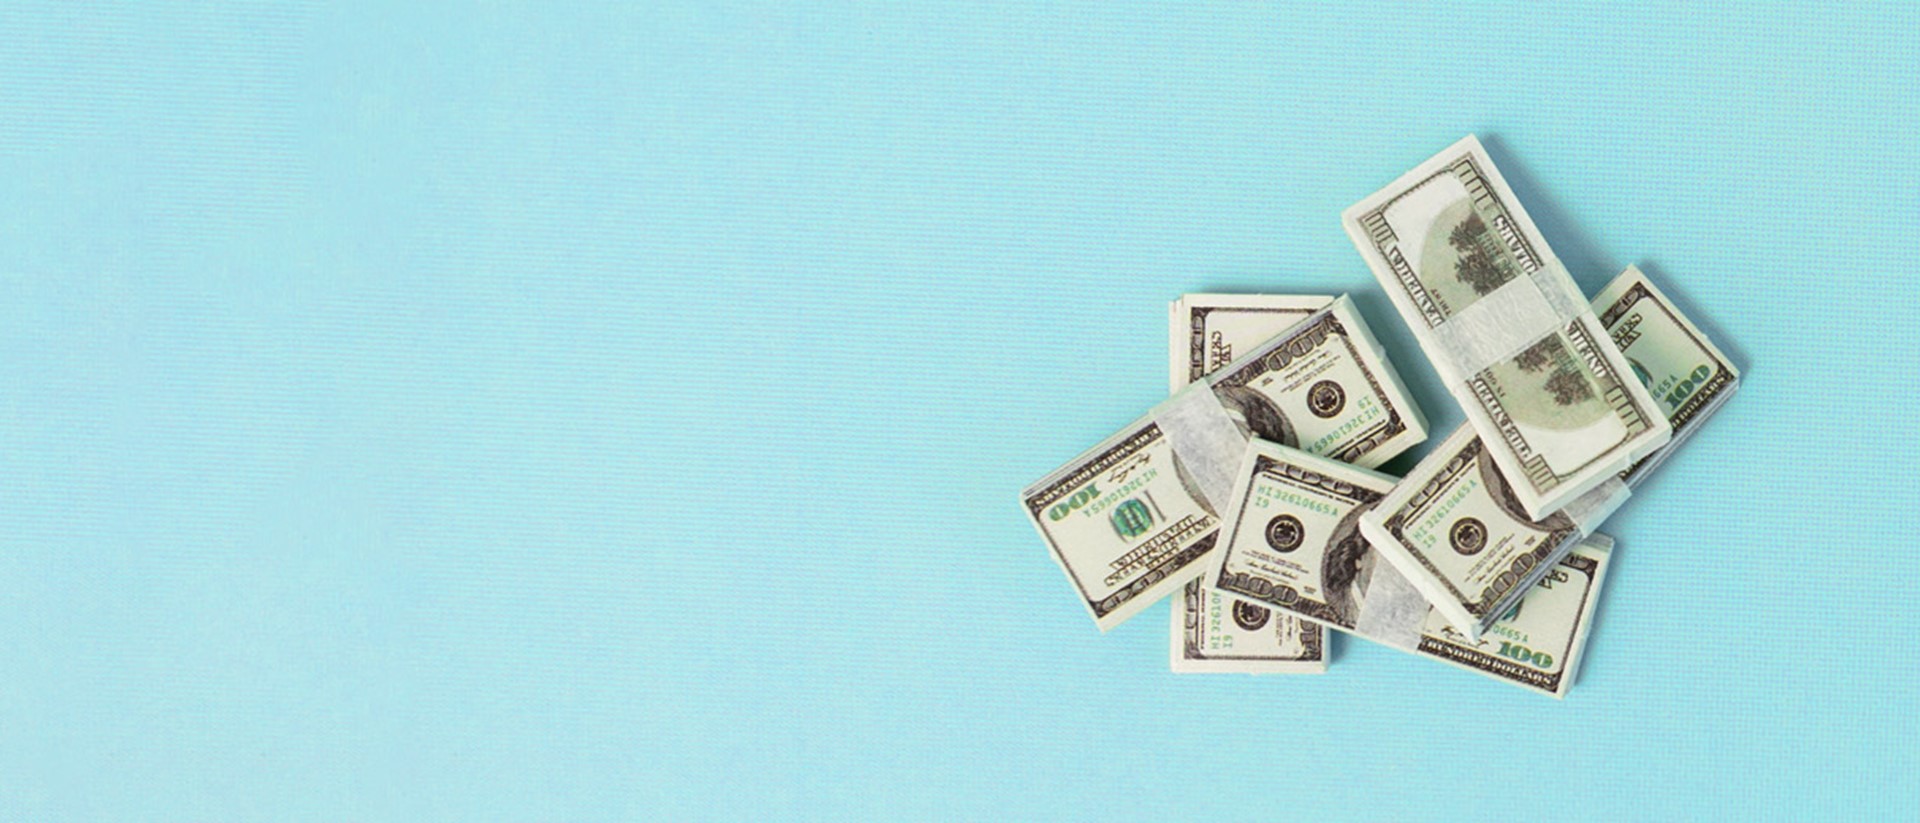 A stack of American dollar bills against a light blue background